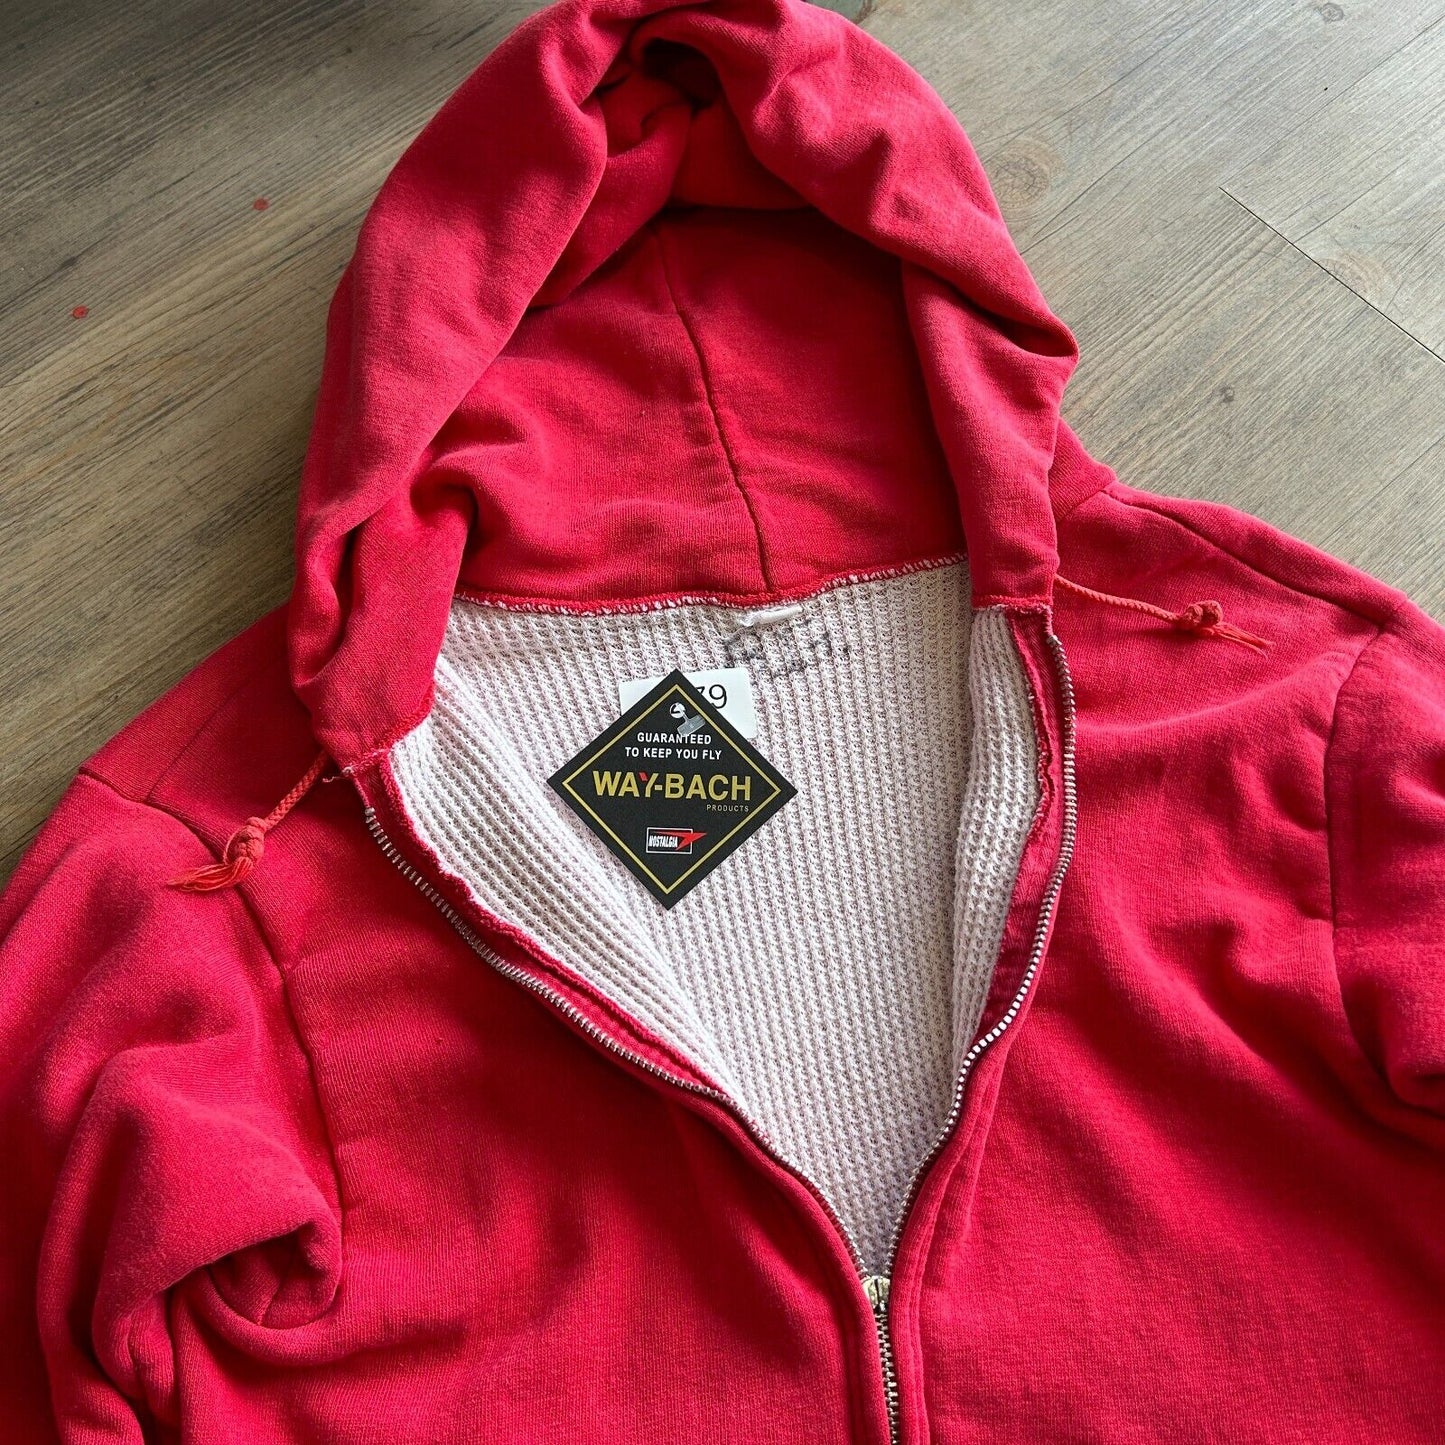 VINTAGE 60s 70s | Blank Red Thermal Lined Zip Up Hoodie Sweater sz S Adult